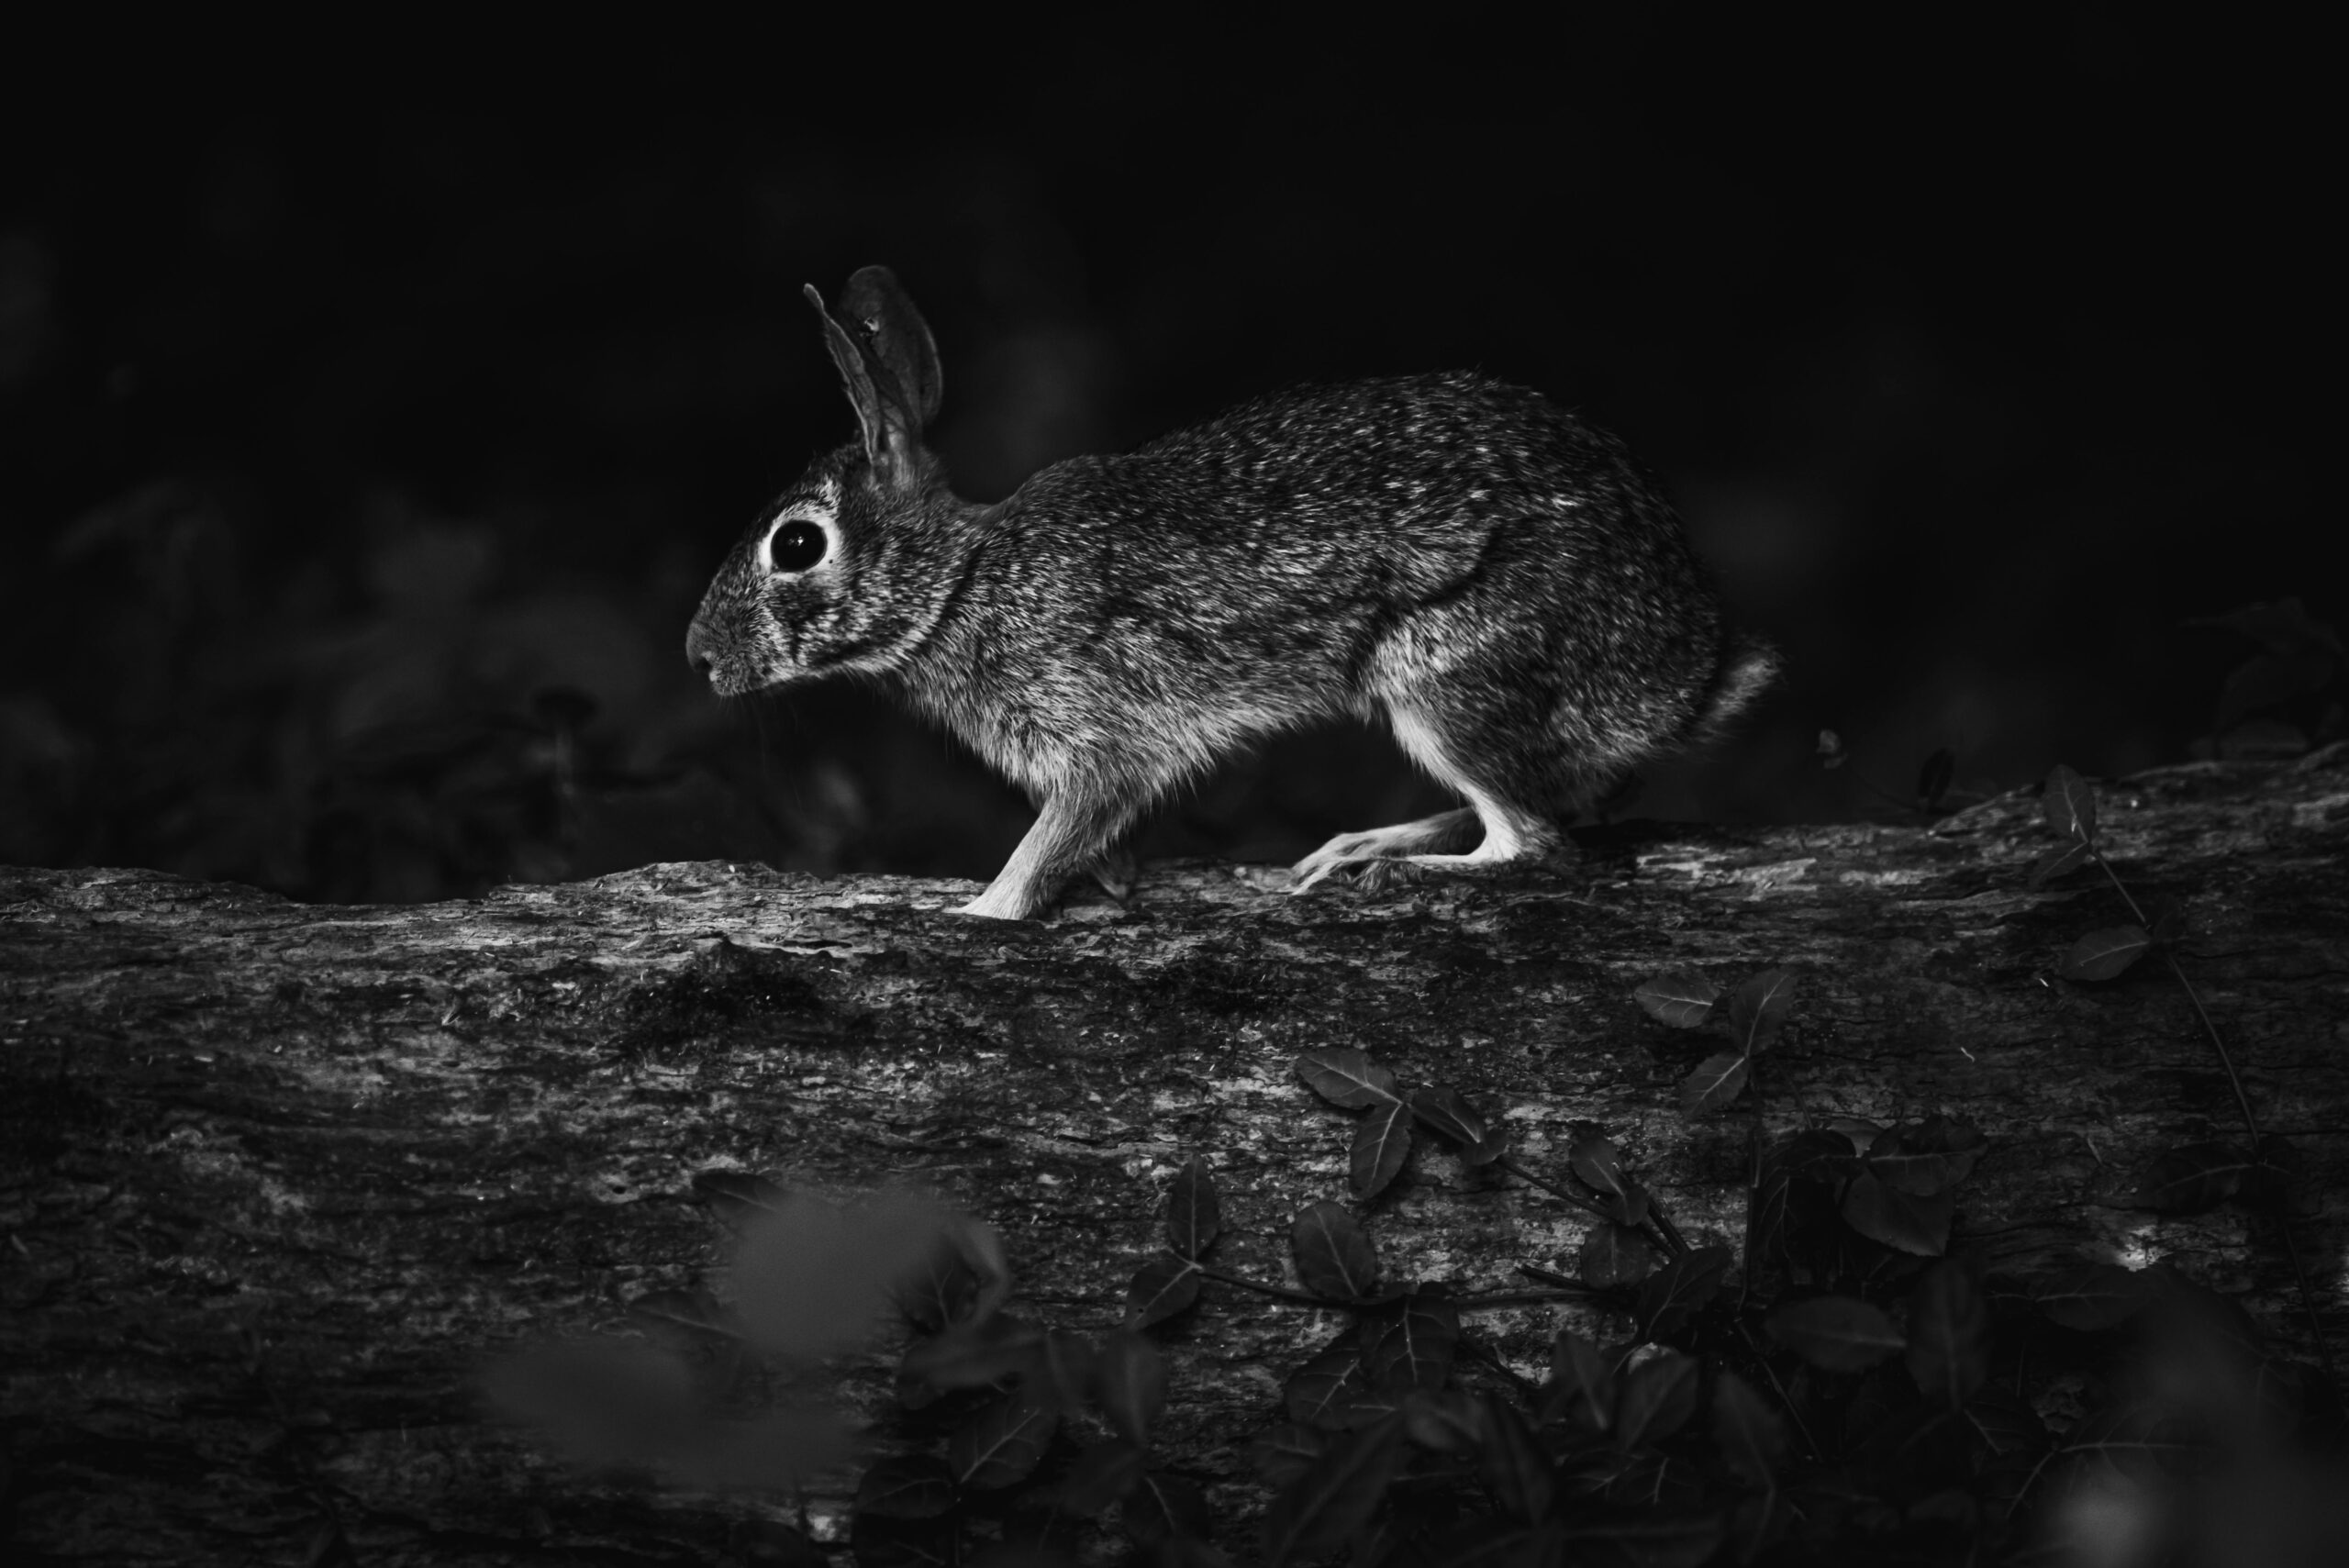 Spotting a Rabbit at Night: Spiritual Meaning